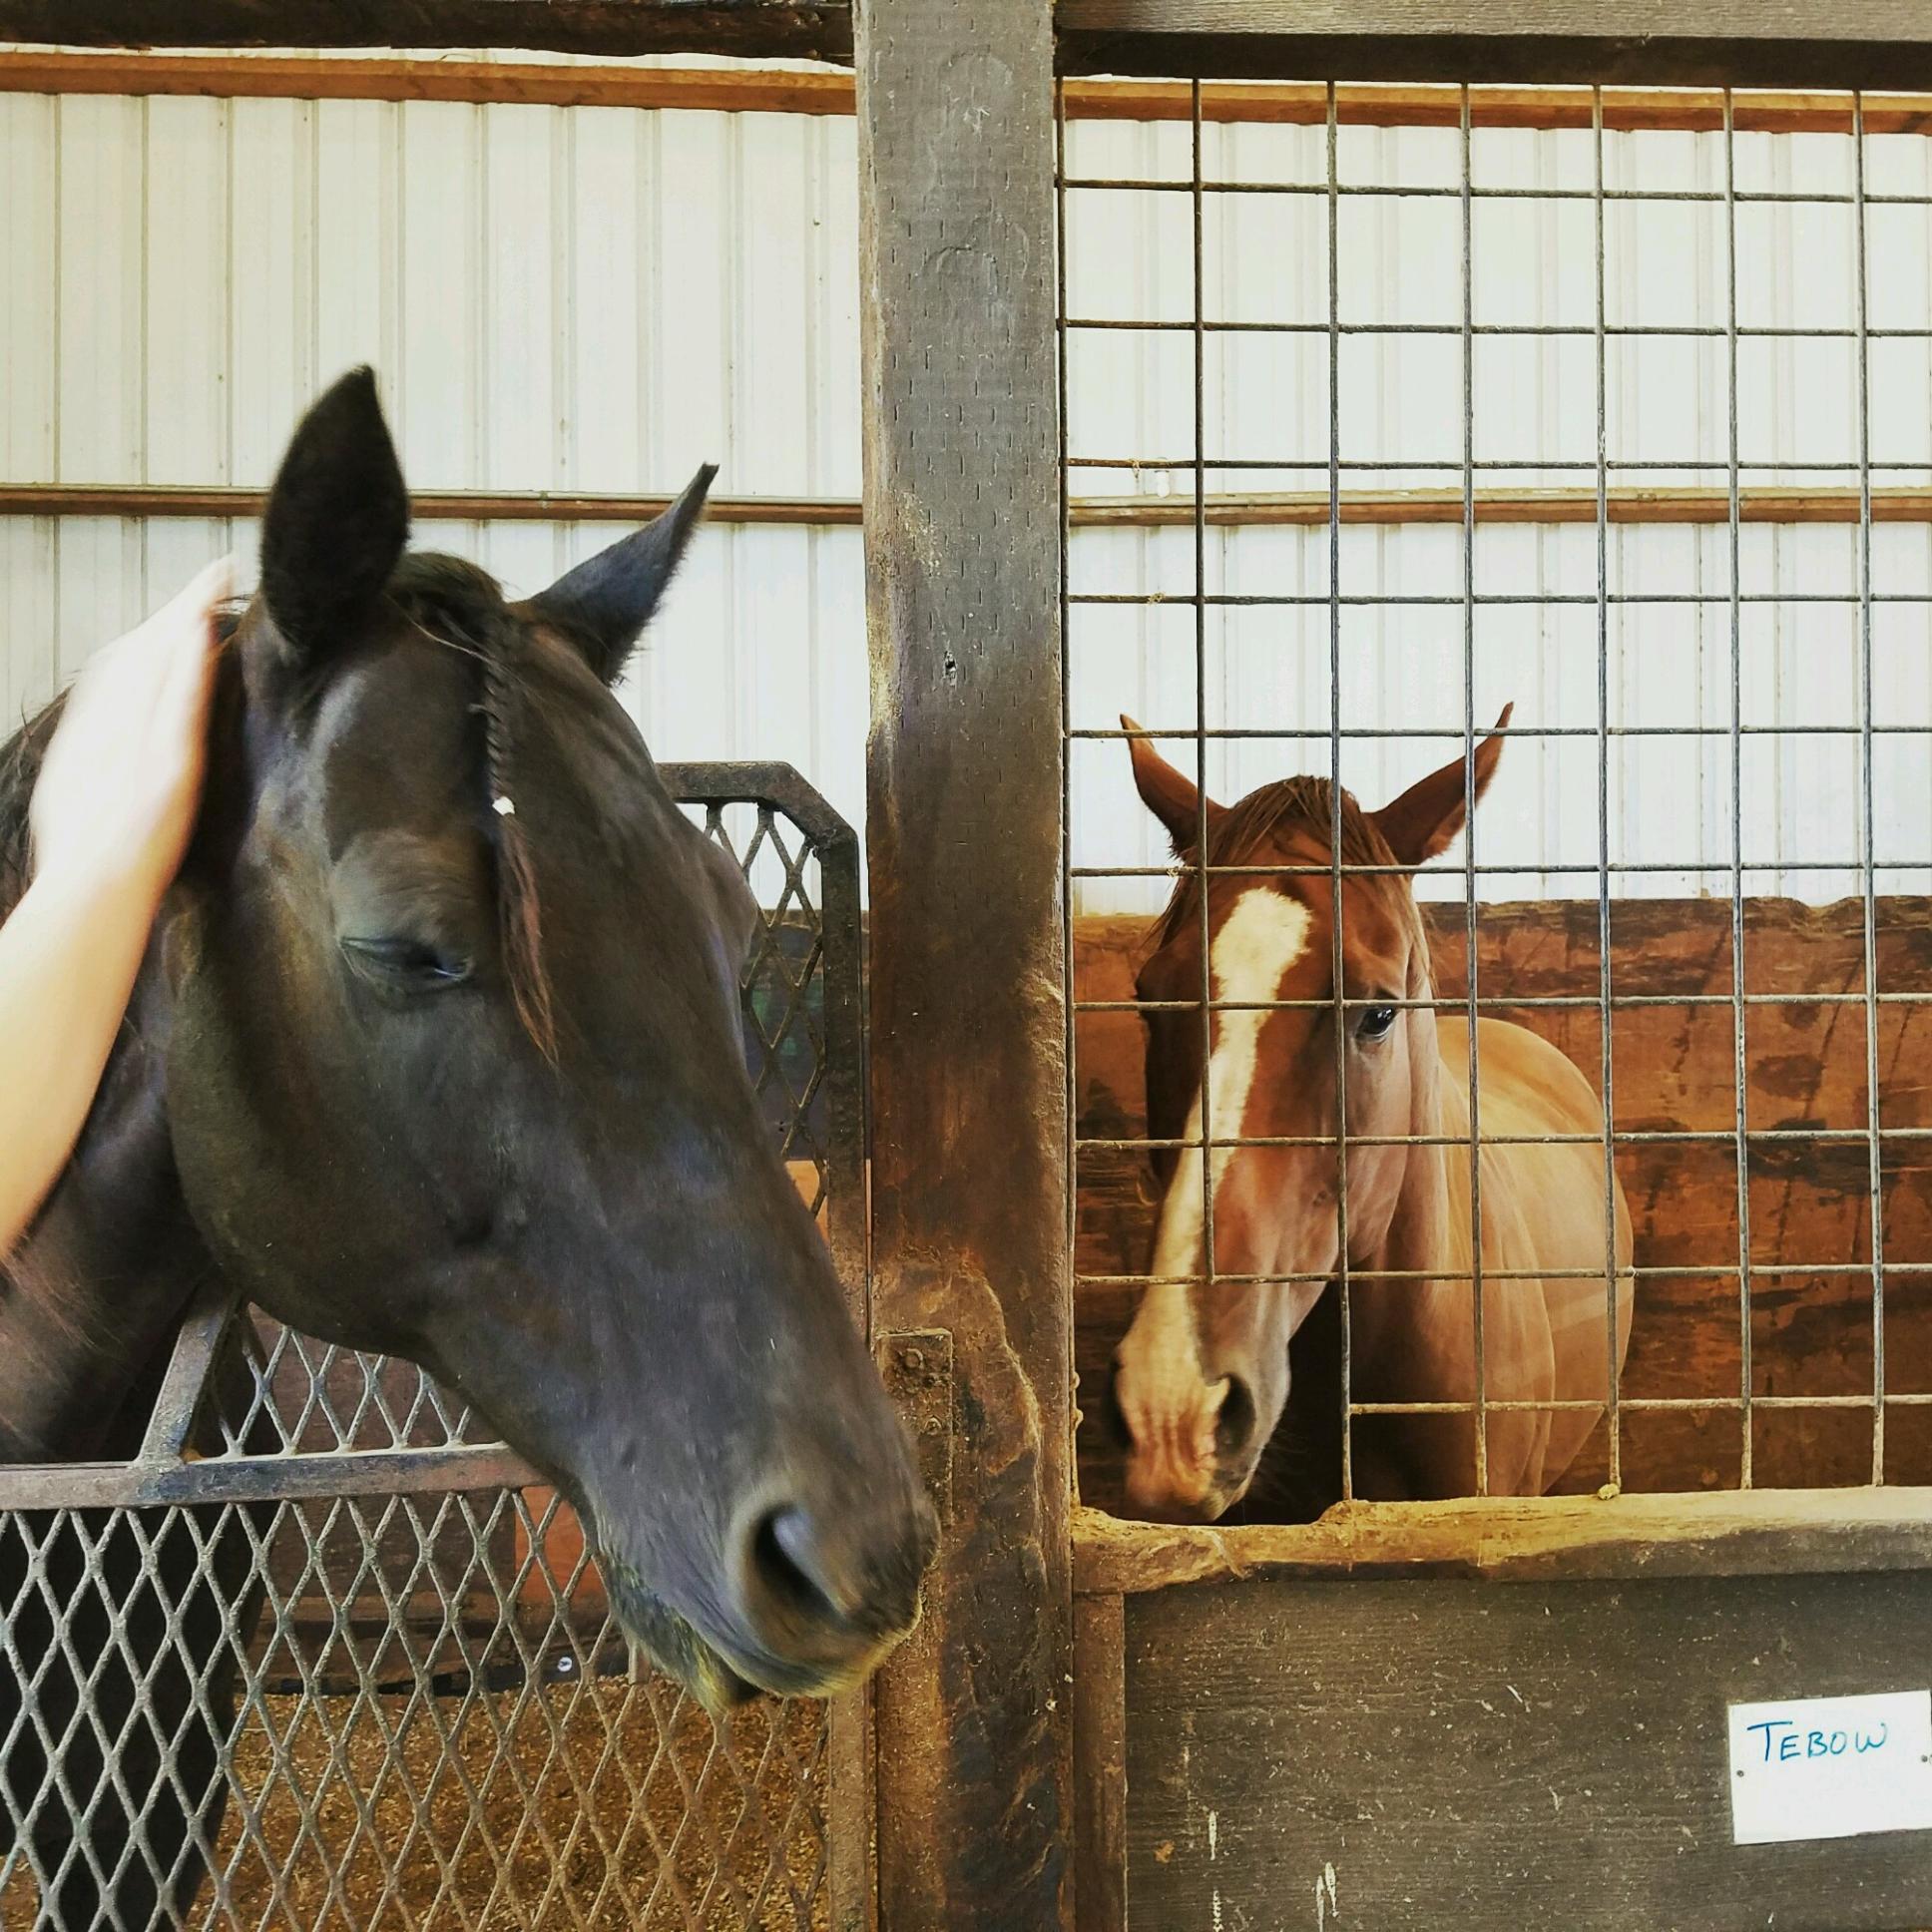 Ahhhh, roomy. Two Thoroughbreds from Healing Arenas in California moved into a bigger barn this week. The move comes as demand for wonderfully talented OTTBs grows.